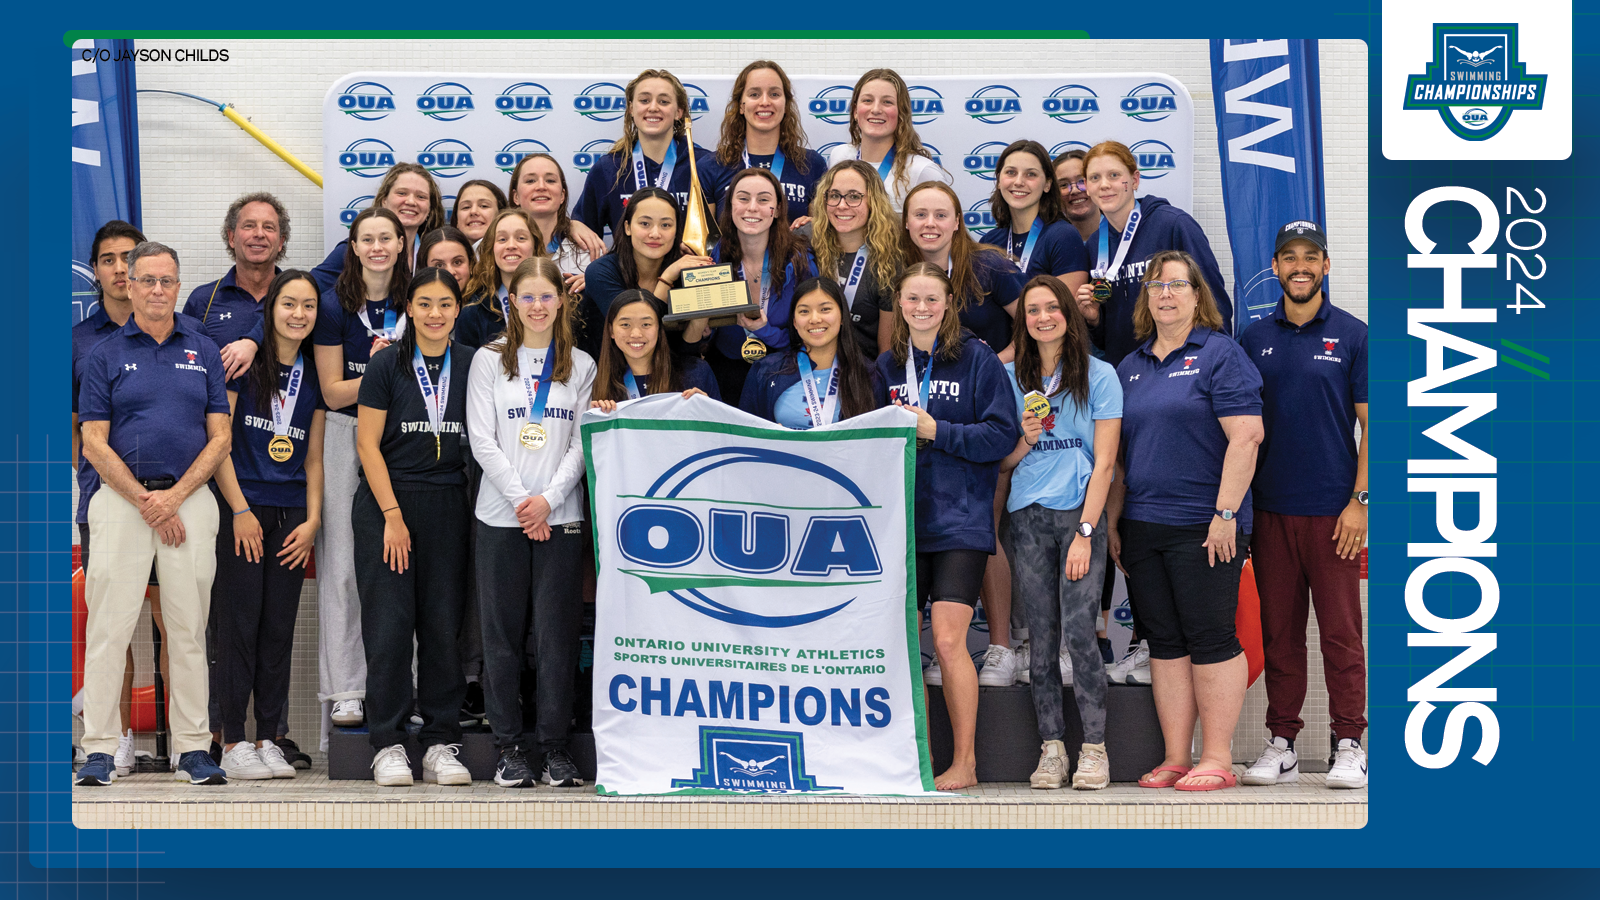 Predominantly blue graphic covered mostly by 2024 OUA Women's Swimming Championship banner photo, with the corresponding championship logo and white text reading '2024 Champions' on the right side